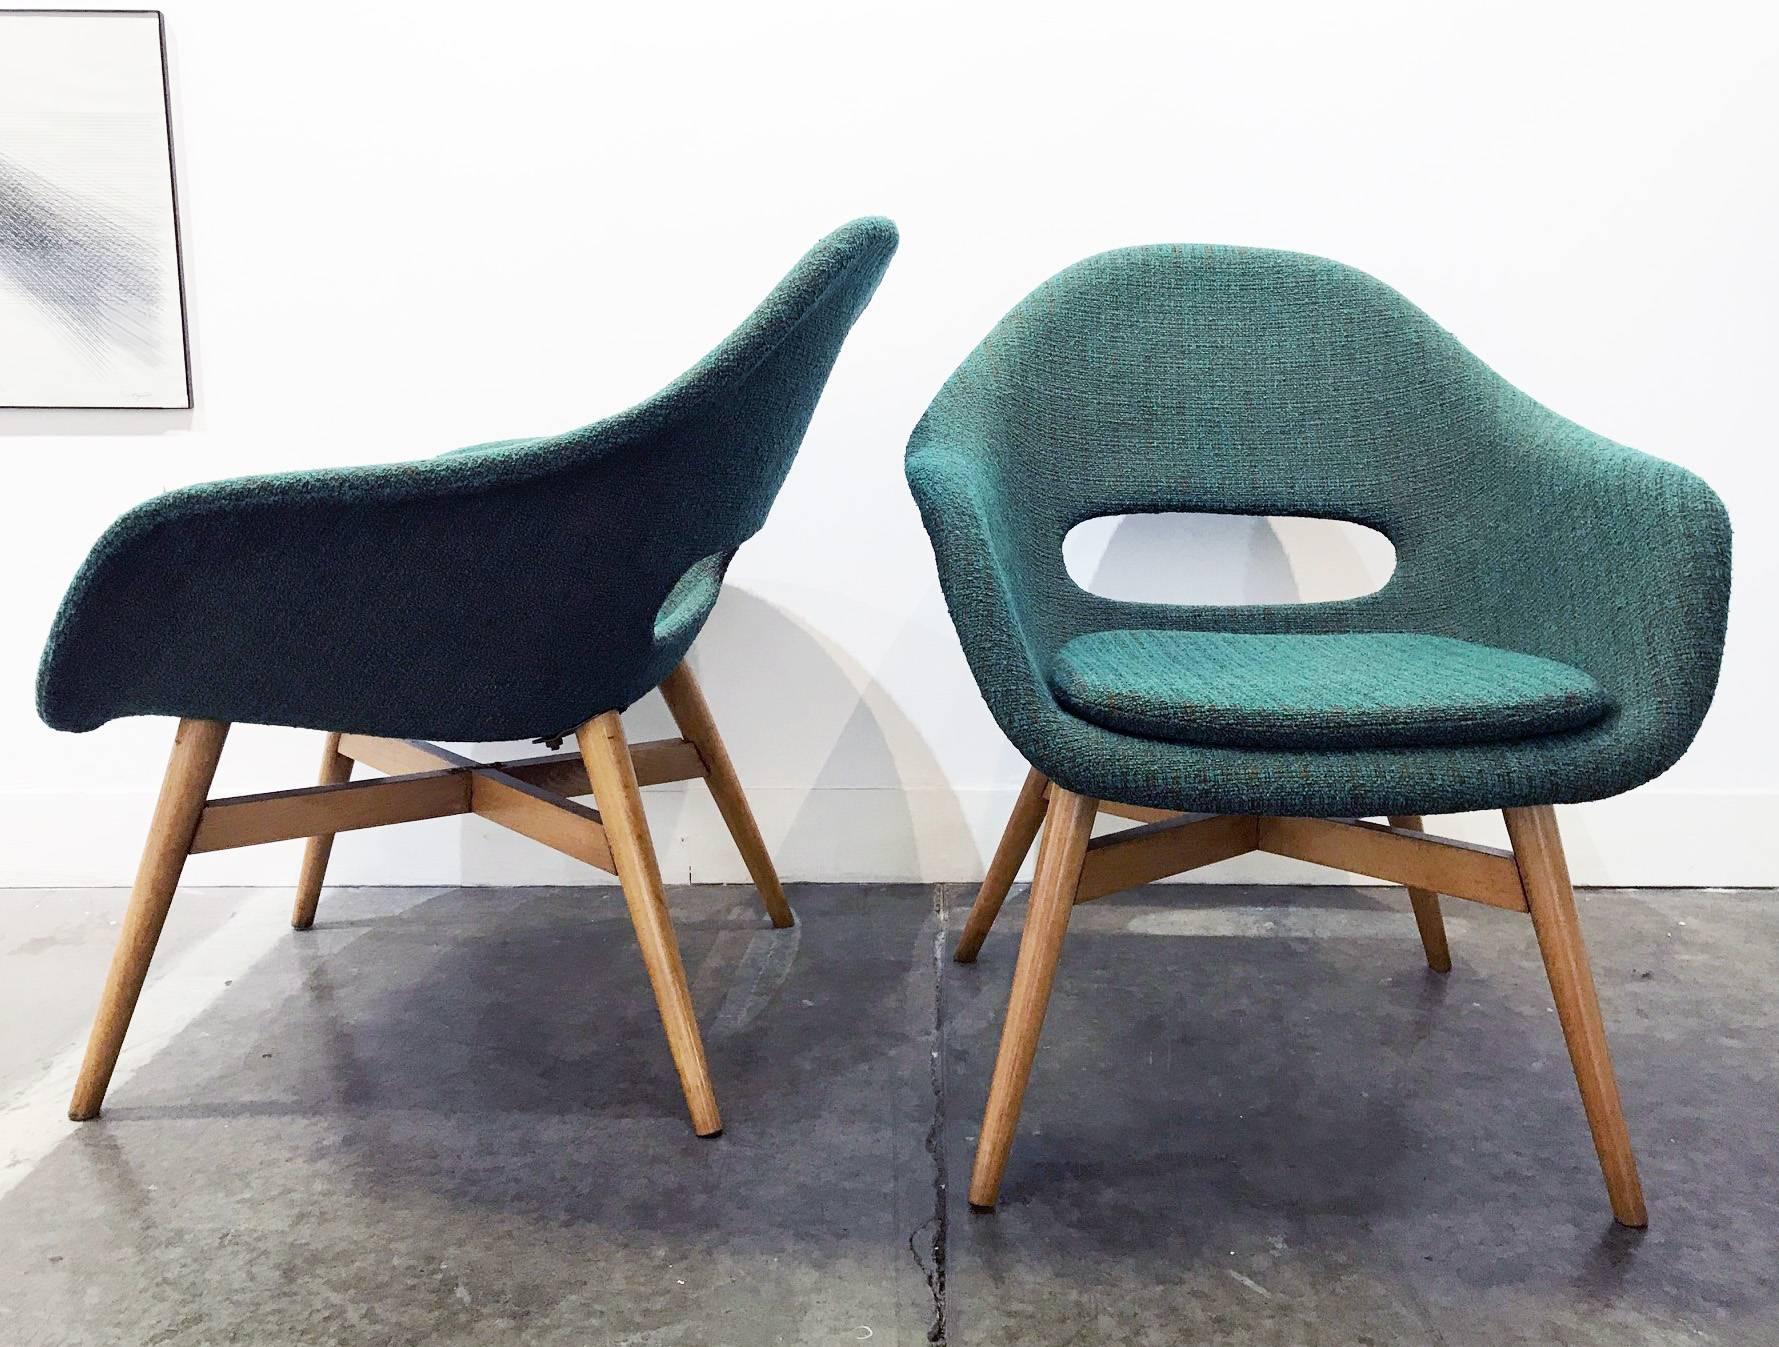 A pair of chairs designed by Miroslav Navratil manufactured in Czech Republic by 